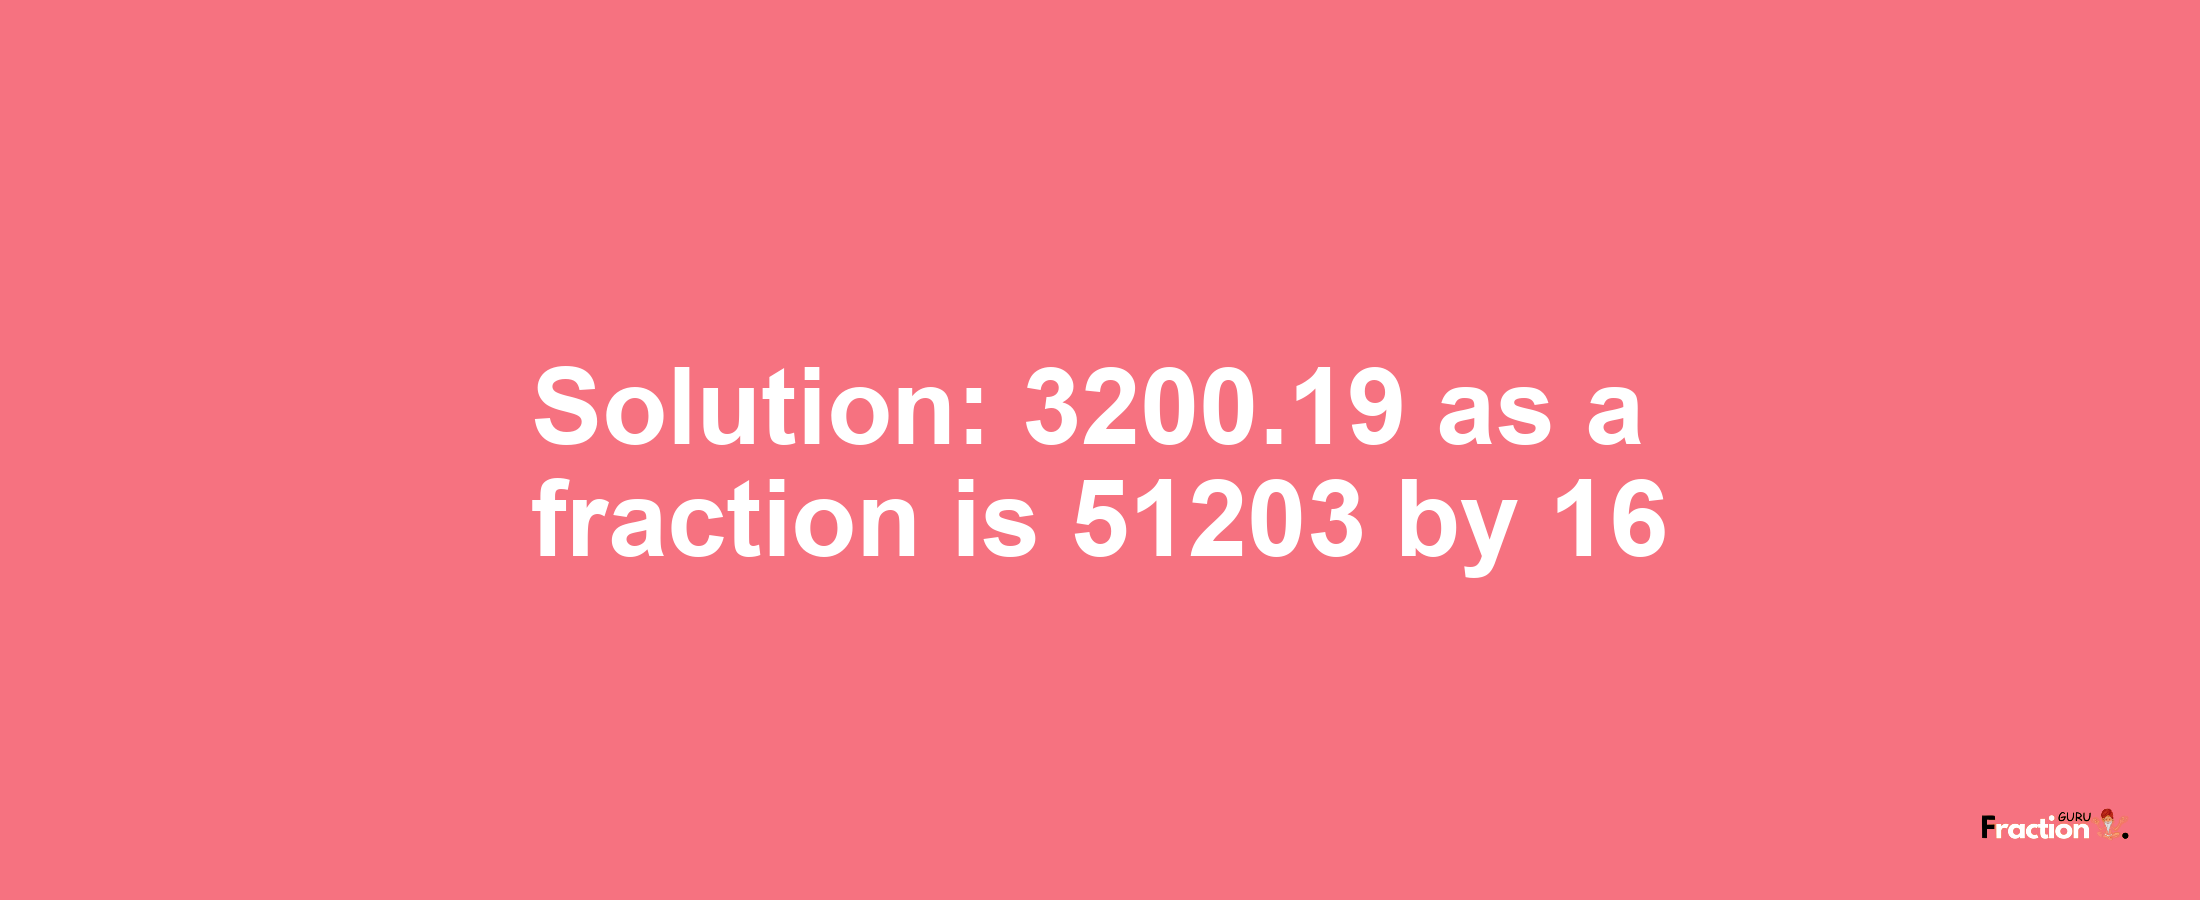 Solution:3200.19 as a fraction is 51203/16